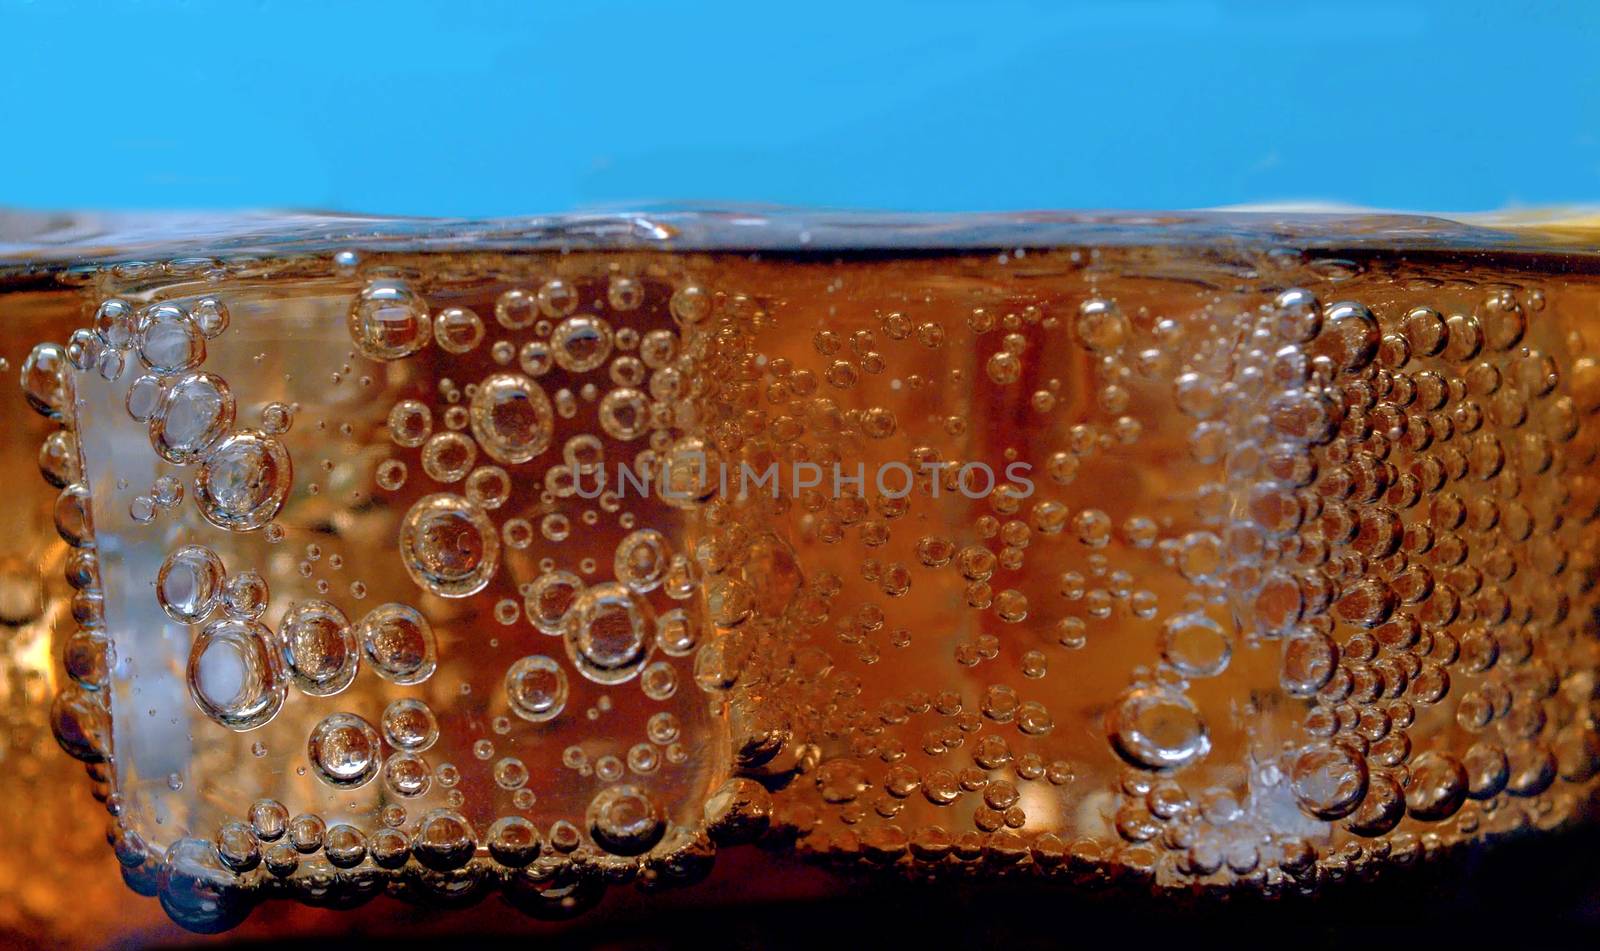 Rising gas bubbles in a glass with cola extreme close up. Pieces of ice floating on the coca surface on blue background. Soda carbonated drink into a drinking glass